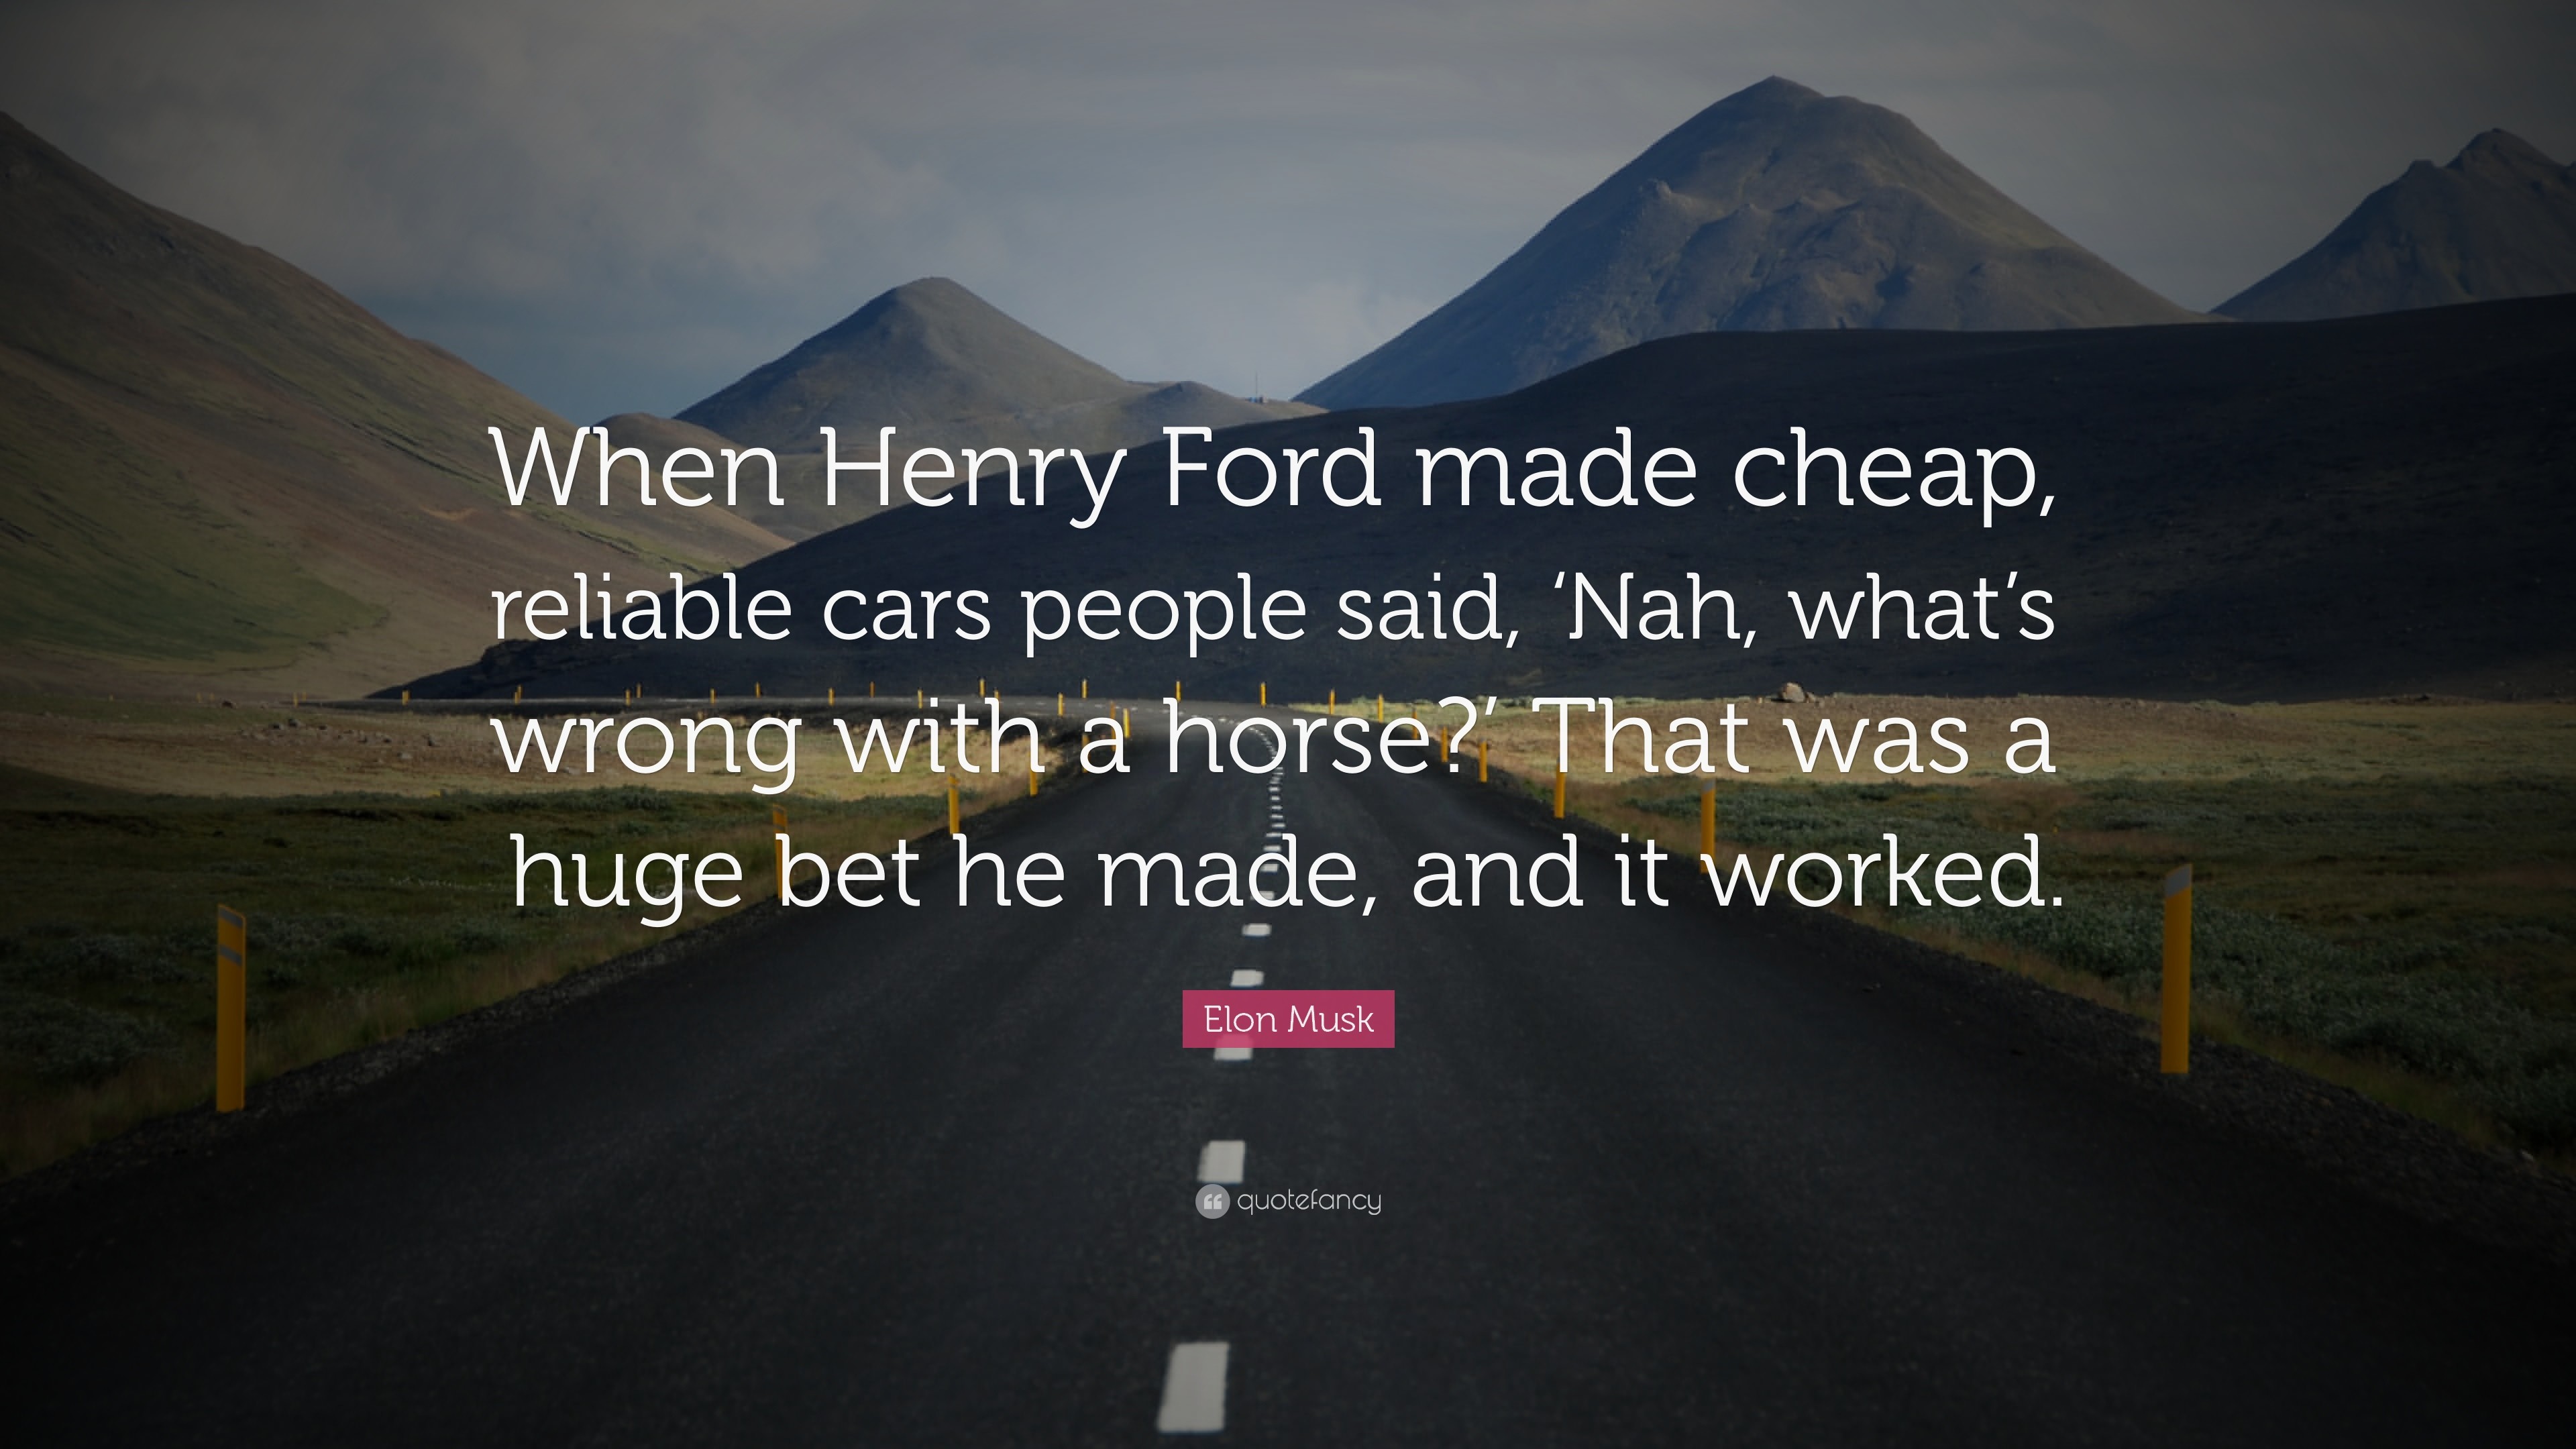 3840x2160 Elon Musk Quote: “When Henry Ford made cheap, reliable cars people said,